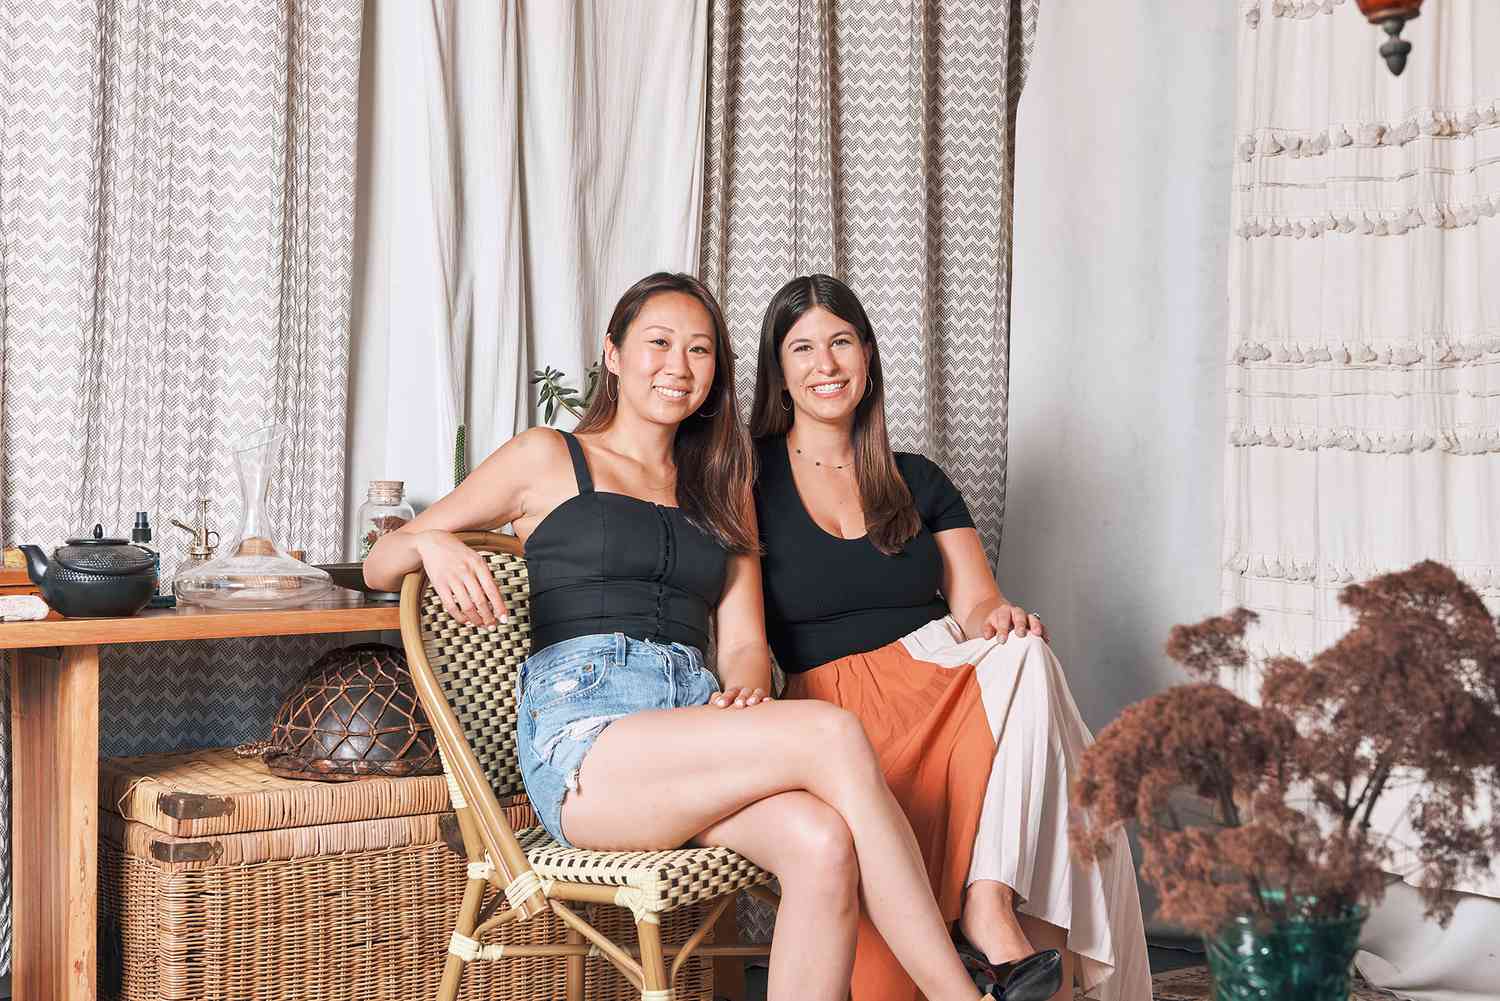 The Founders of Frankly Apparel Created a Chic, Braless Clothing Line Designed for All Cup Sizes